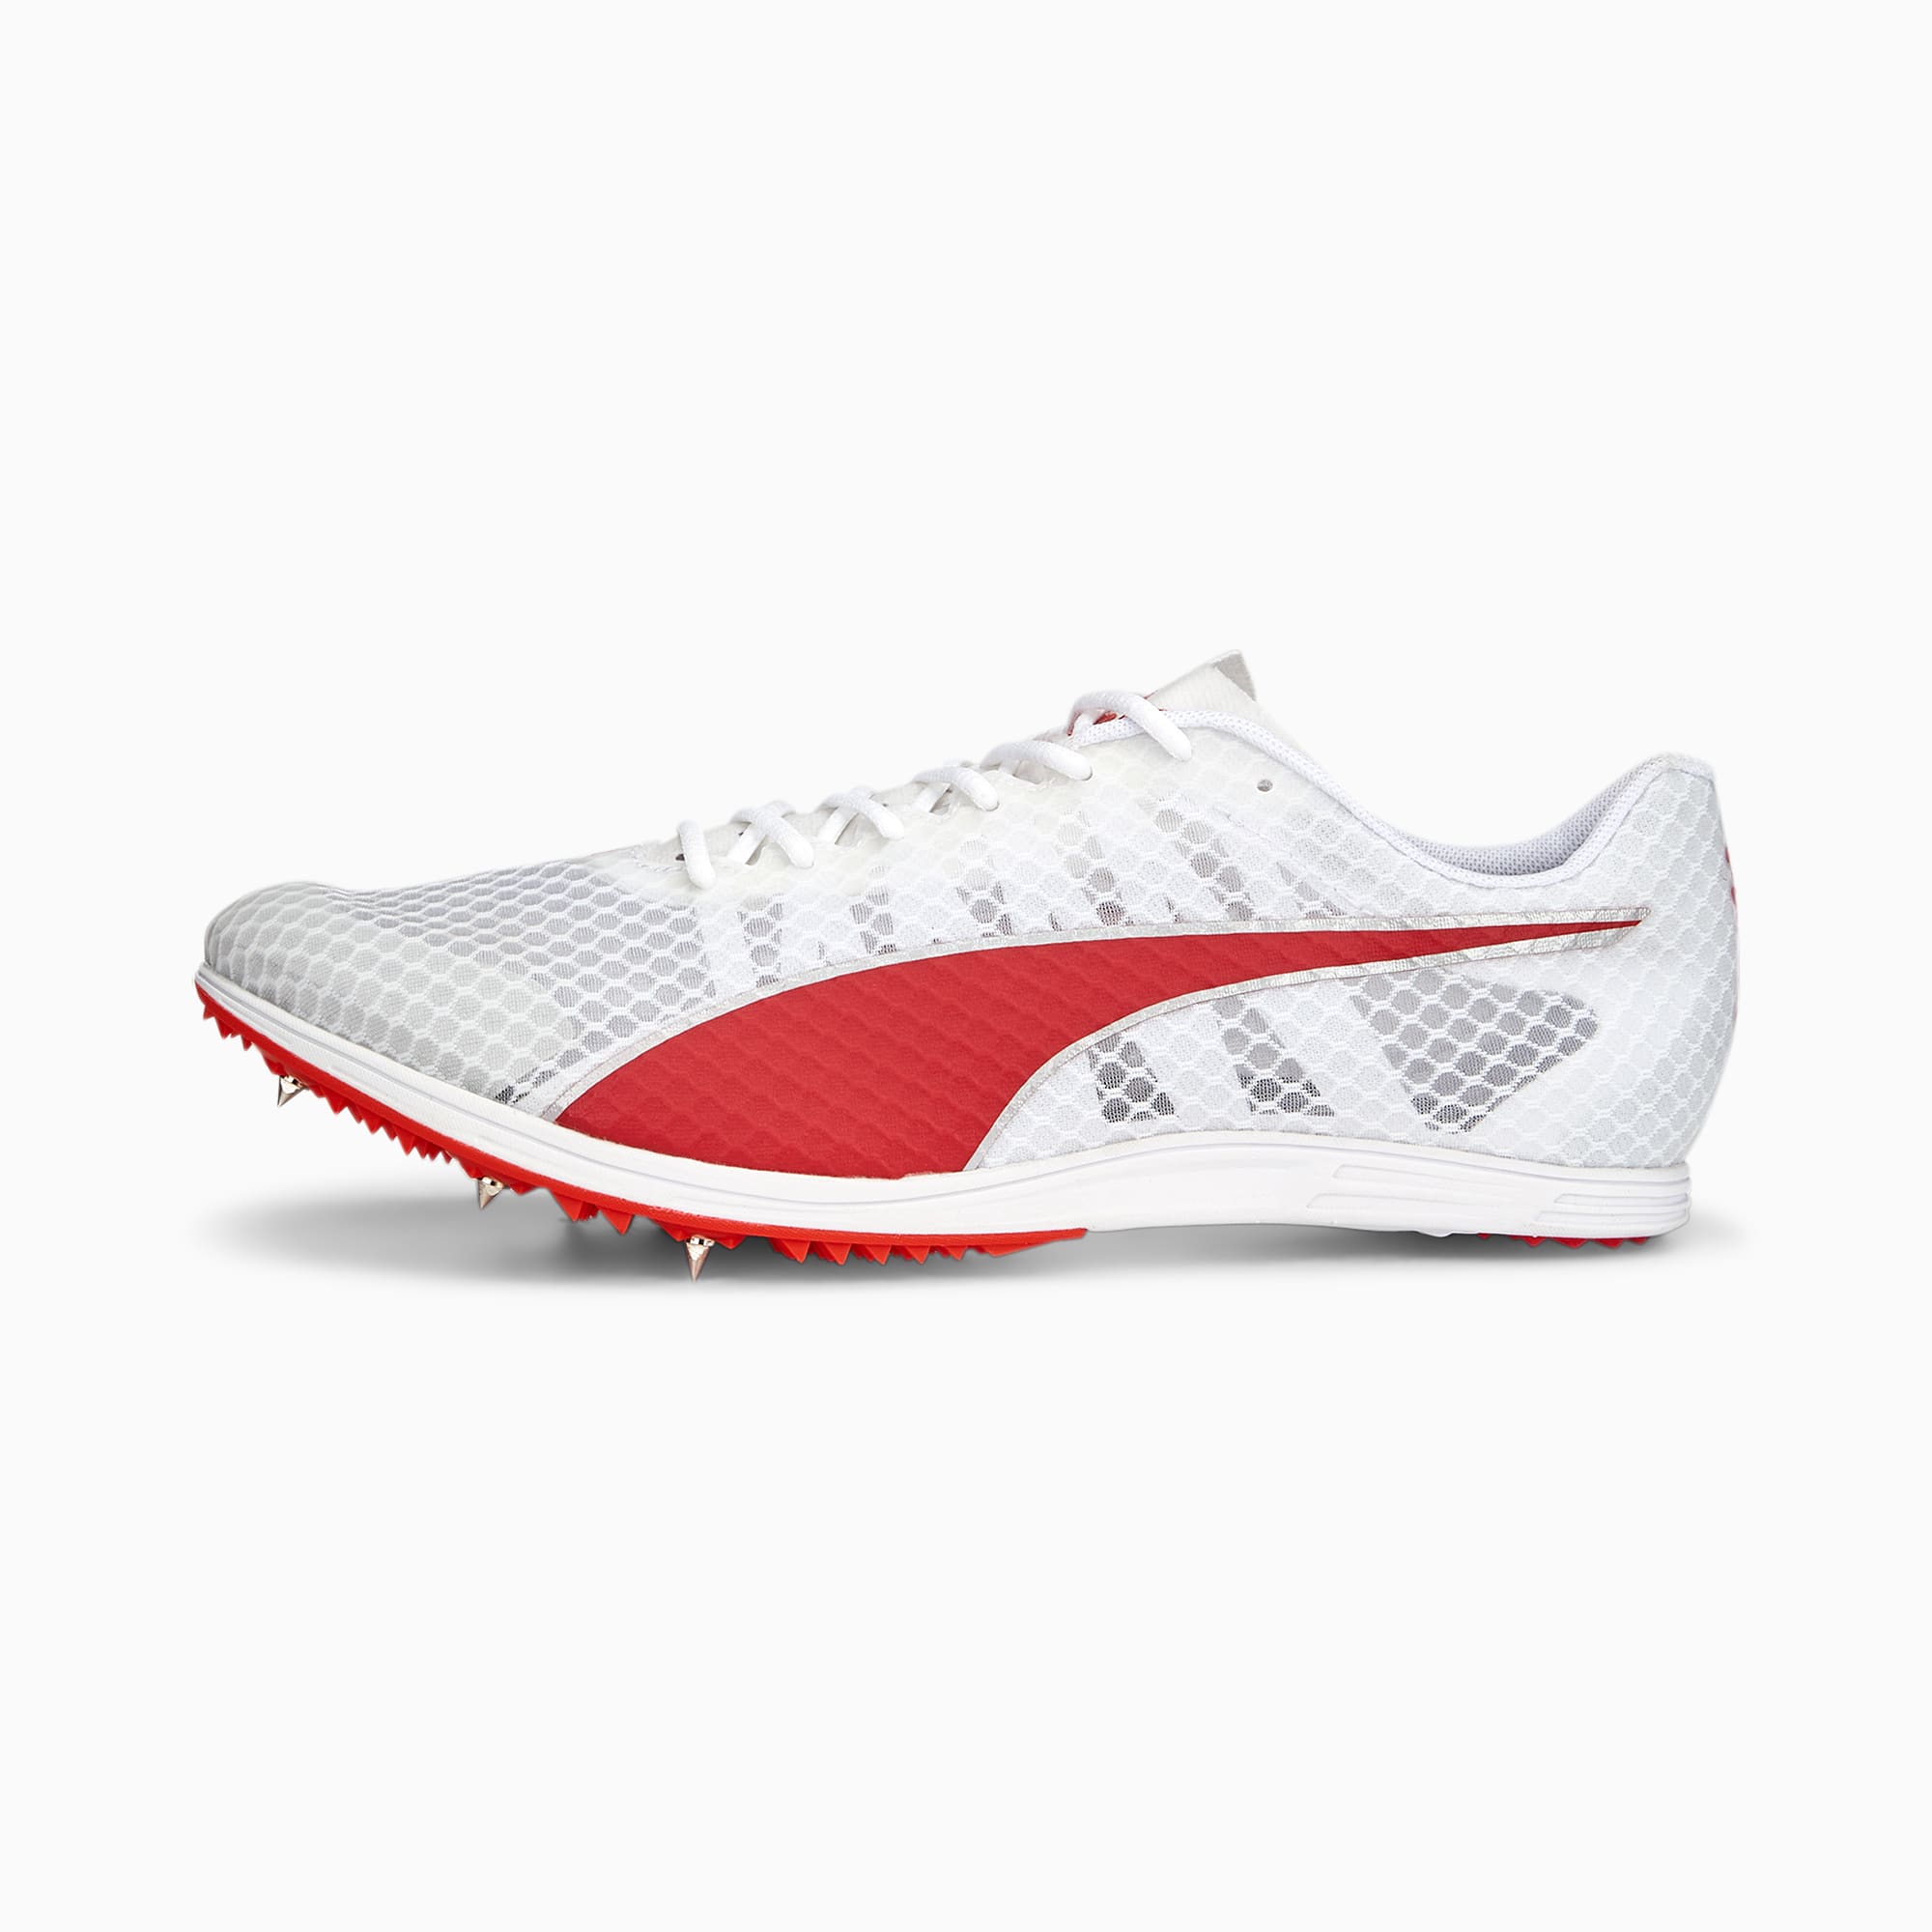 PUMA Evospeed Distance 11 Track And Field Shoes Men, White/Red/Metallic Silver, Size 35,5, Shoes